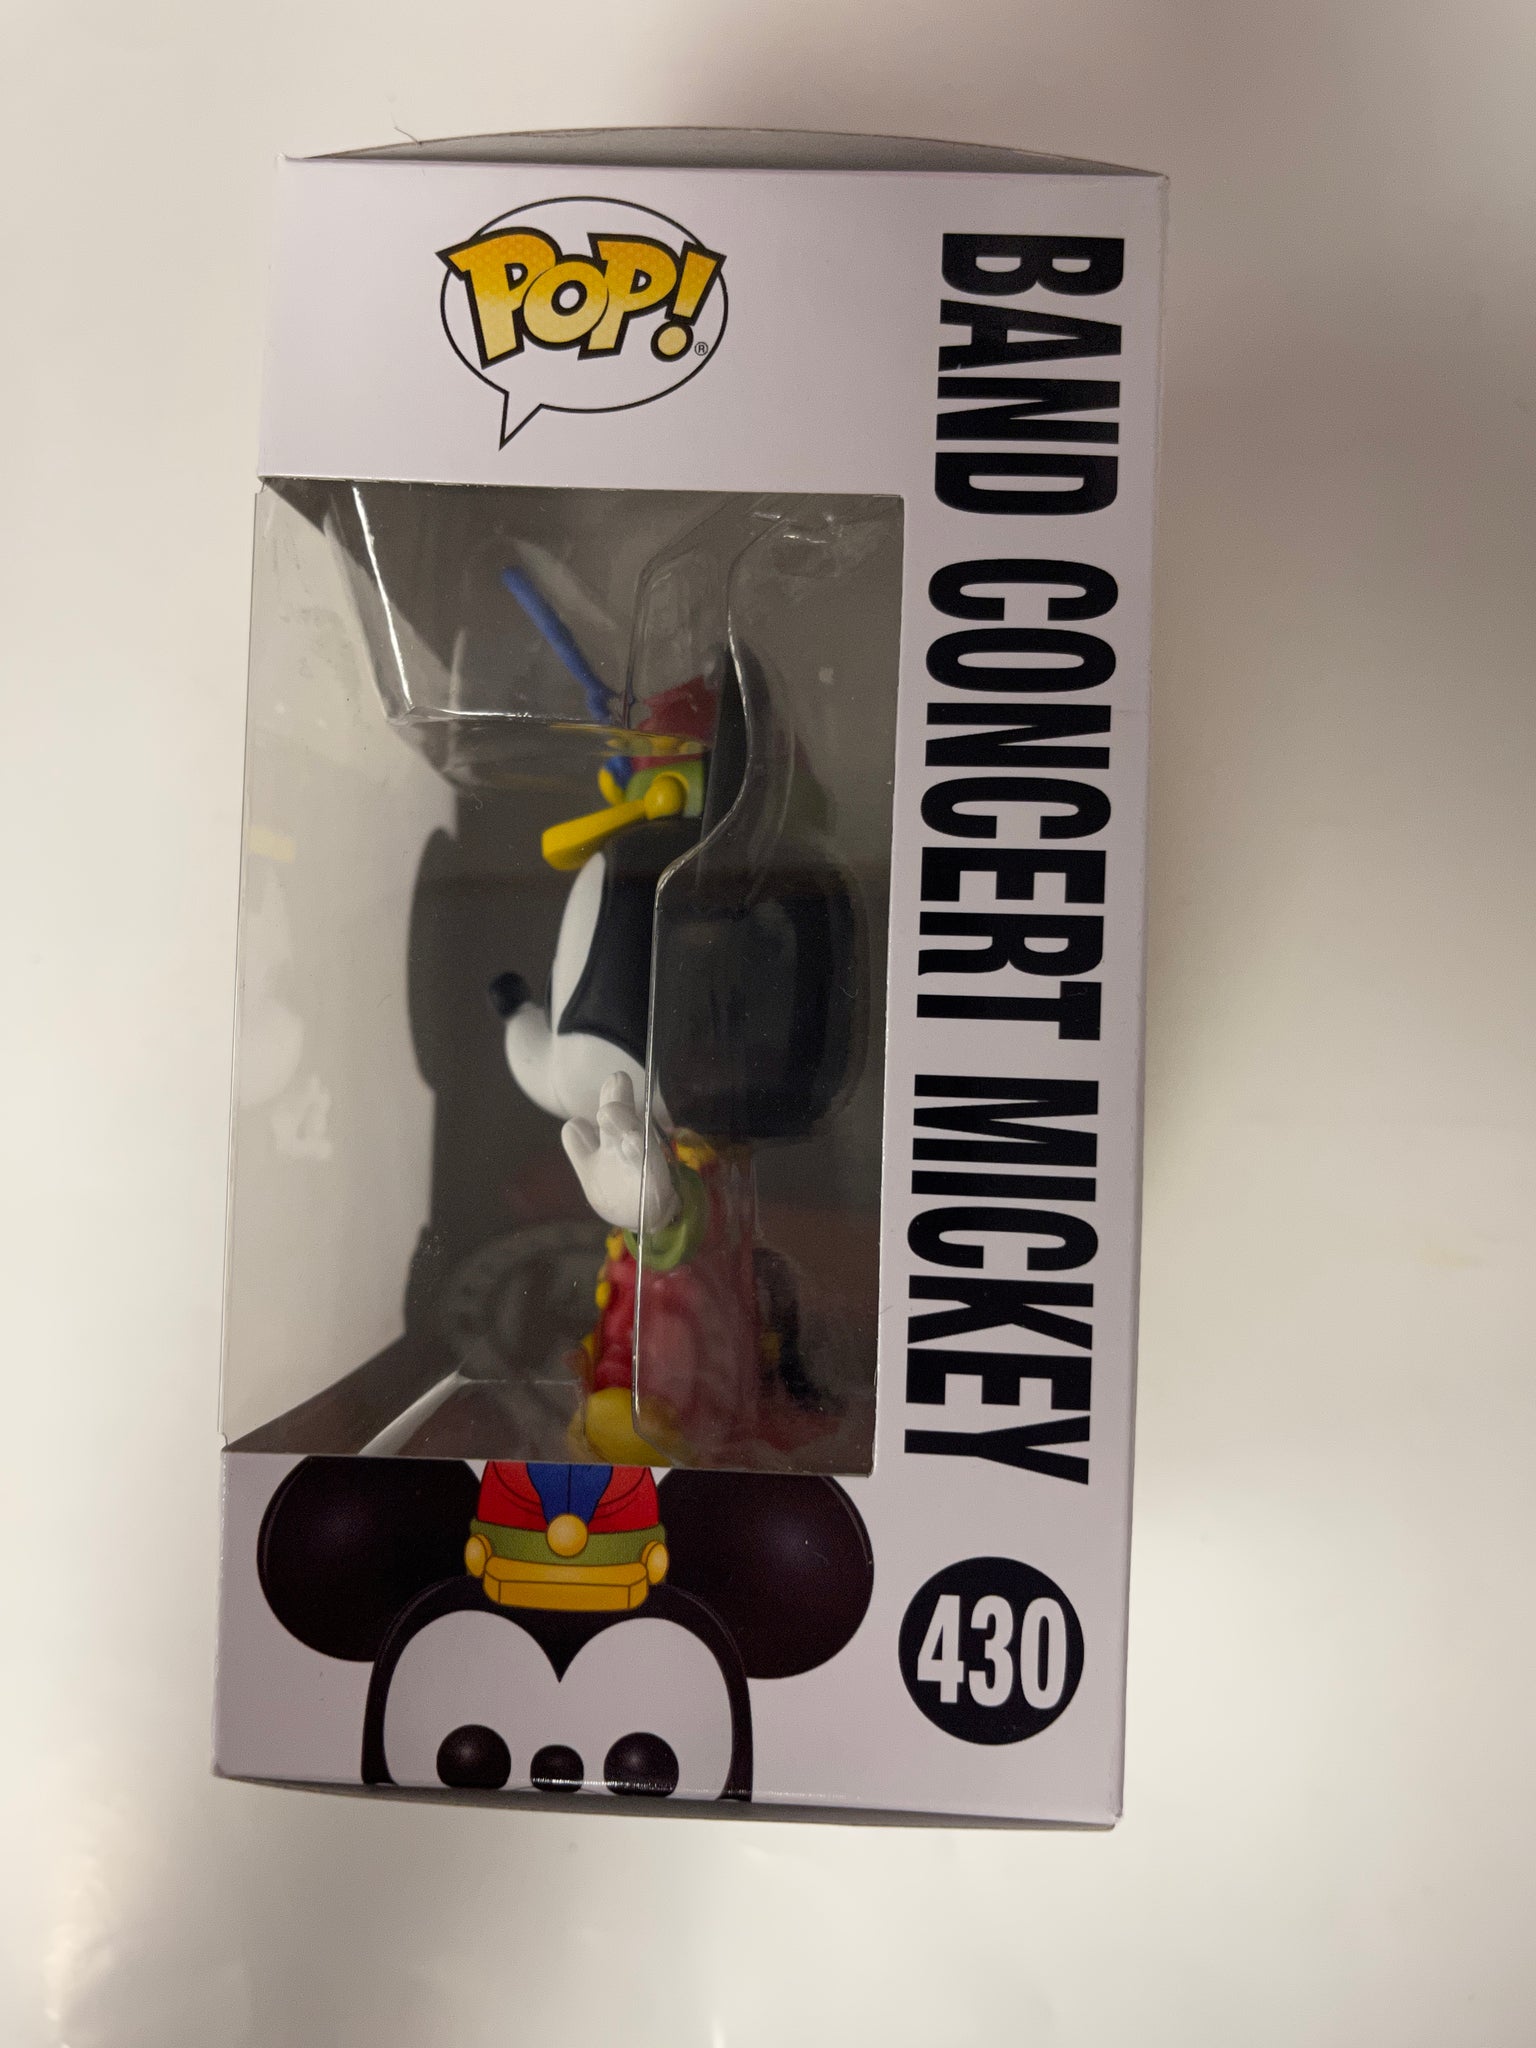 Funko Pop! Disney 01 Mickey Mouse True Original 90 Years Limited Variant  Figure - We-R-Toys